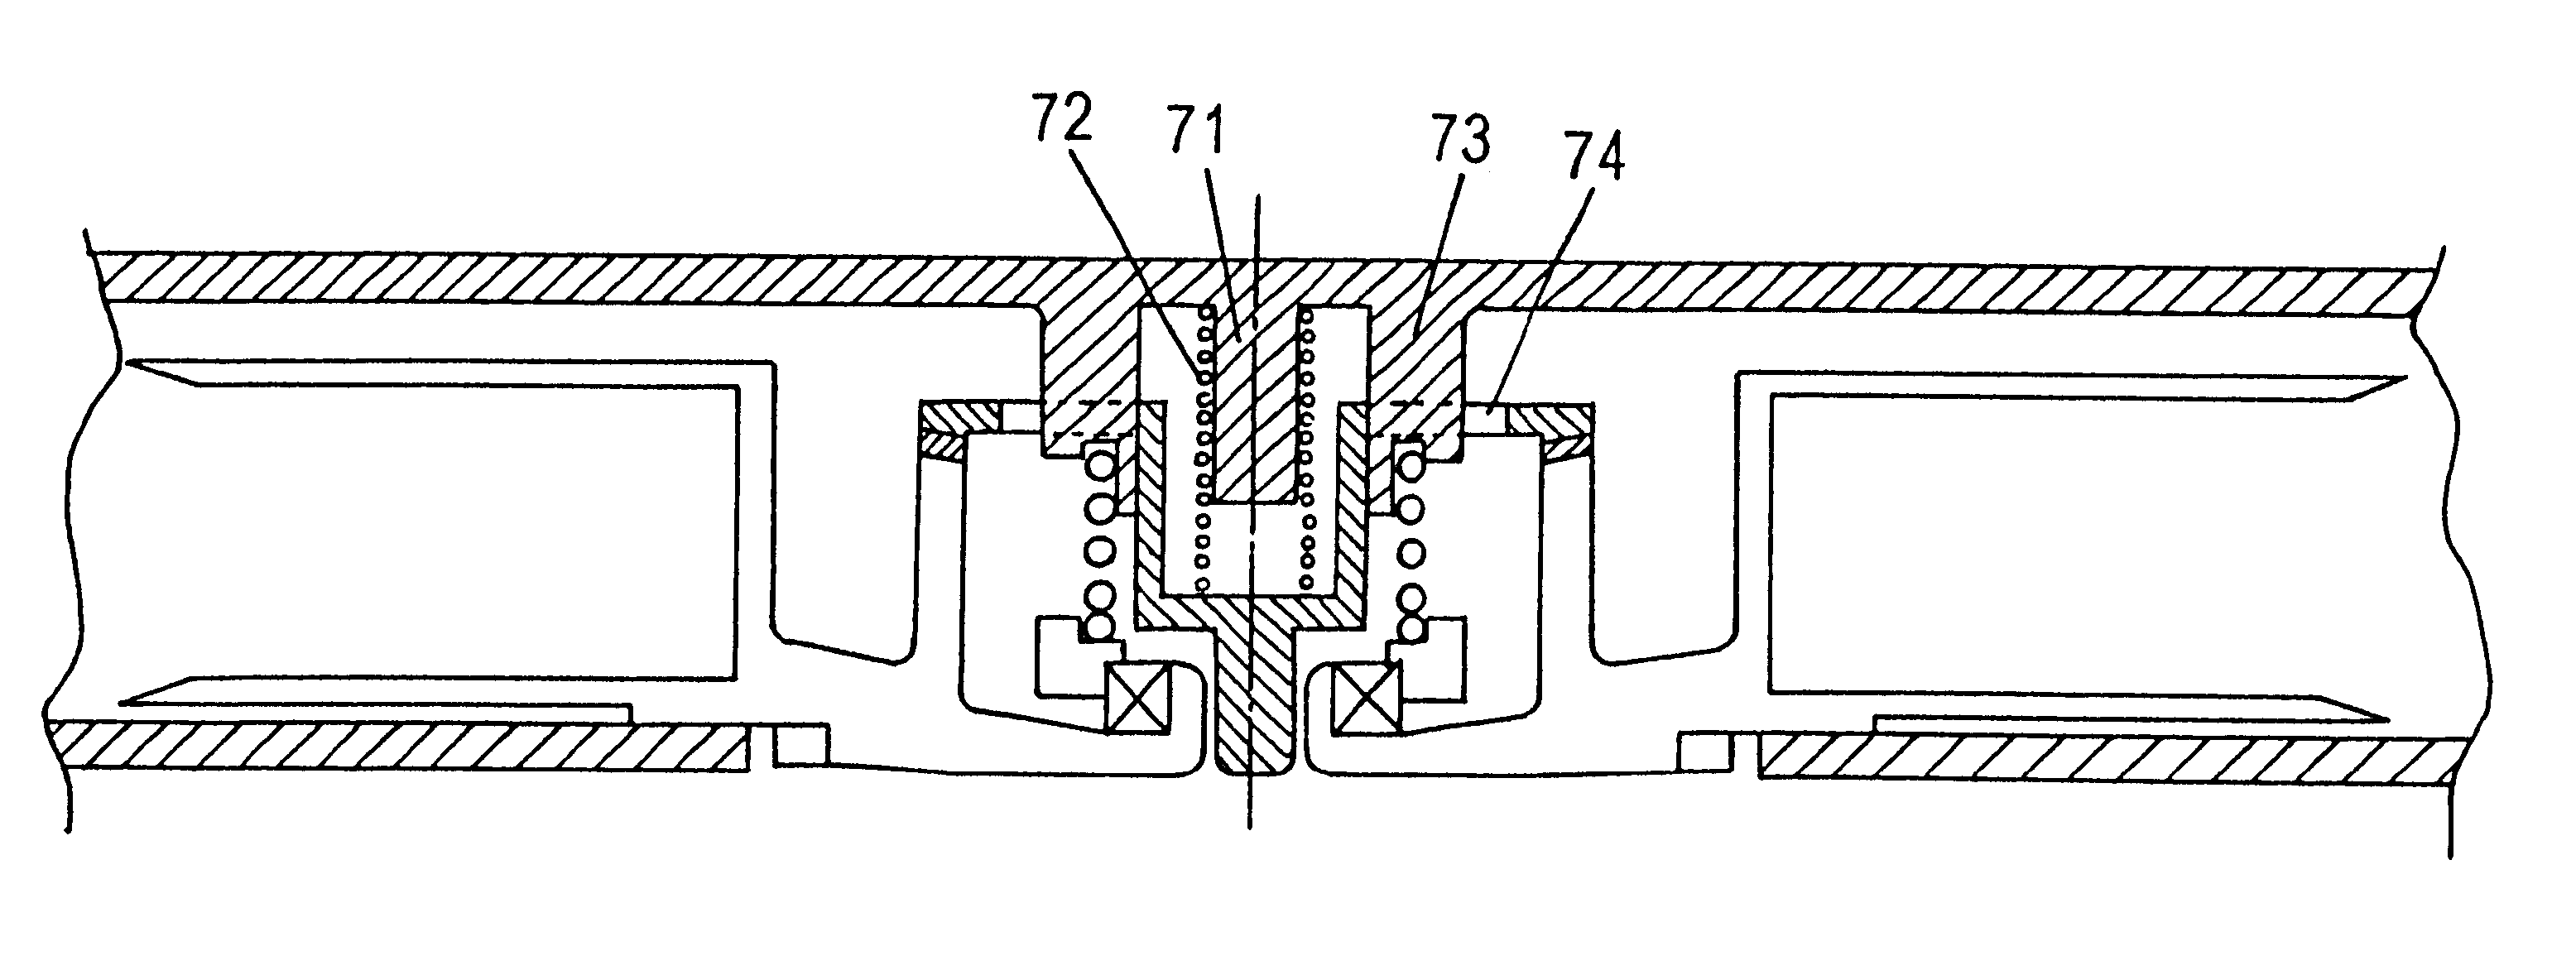 Reel lock and coupling engagement mechanisms for a cartridge